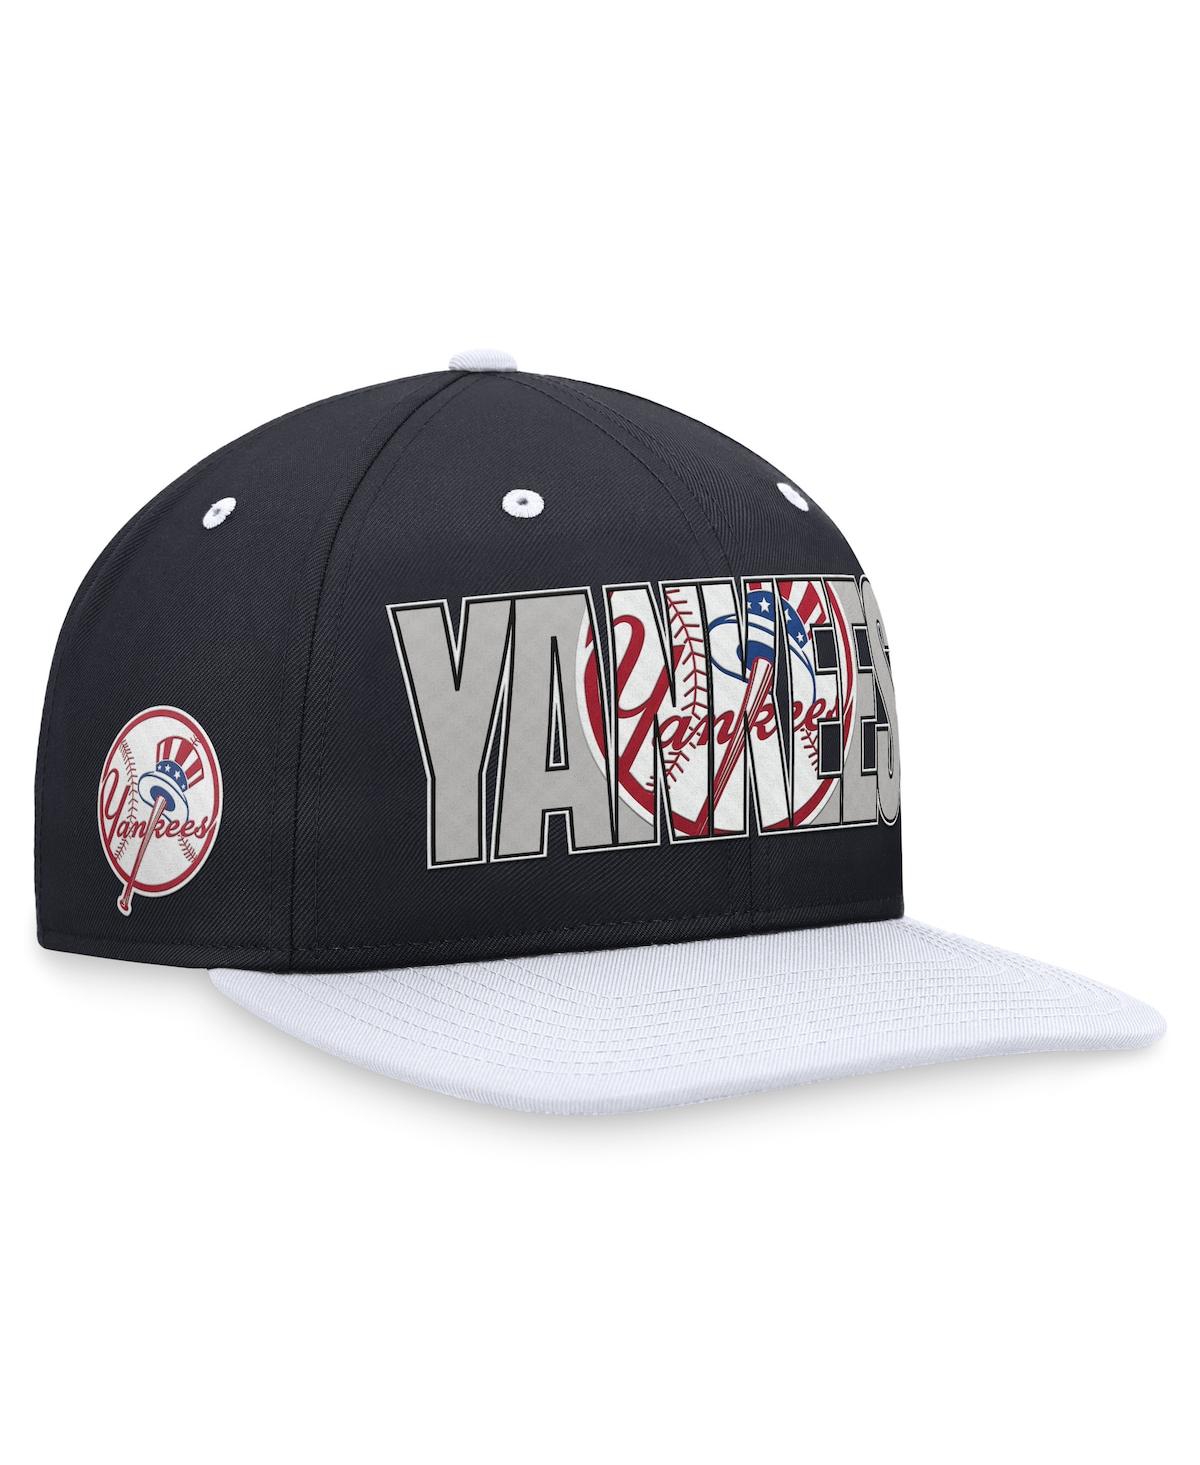 Shop Nike Men's  Navy New York Yankees Cooperstown Collection Pro Snapback Hat